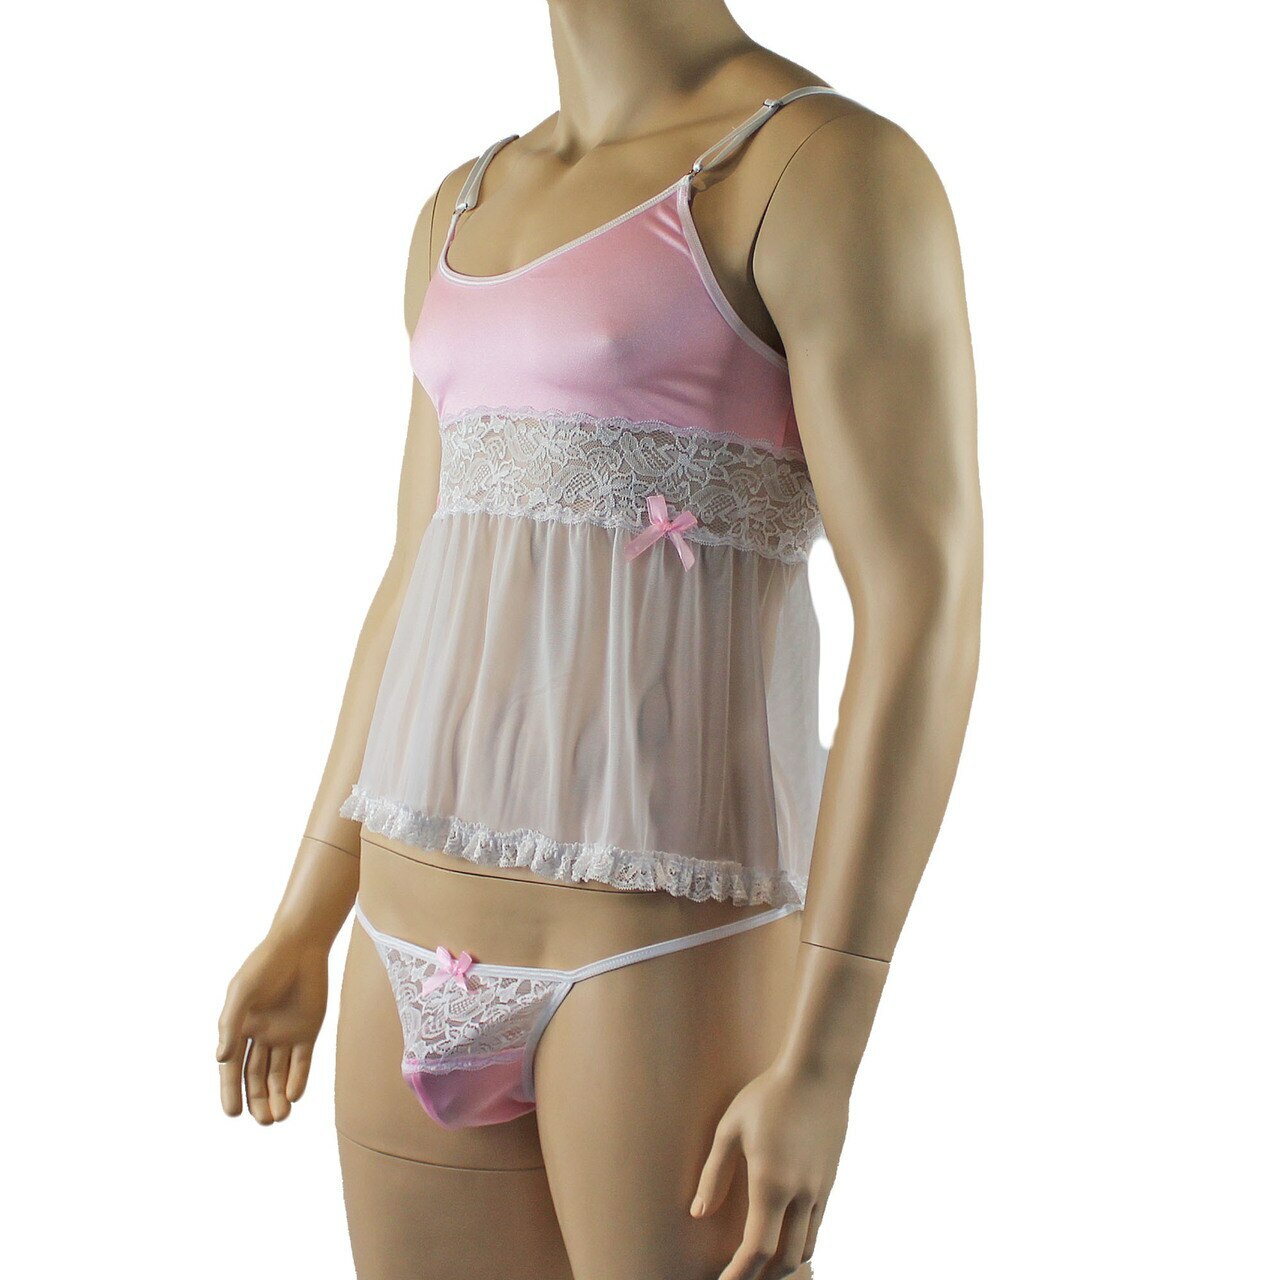 Mens Mini Babydoll Camisole & G string (light pink and white plus other colours)